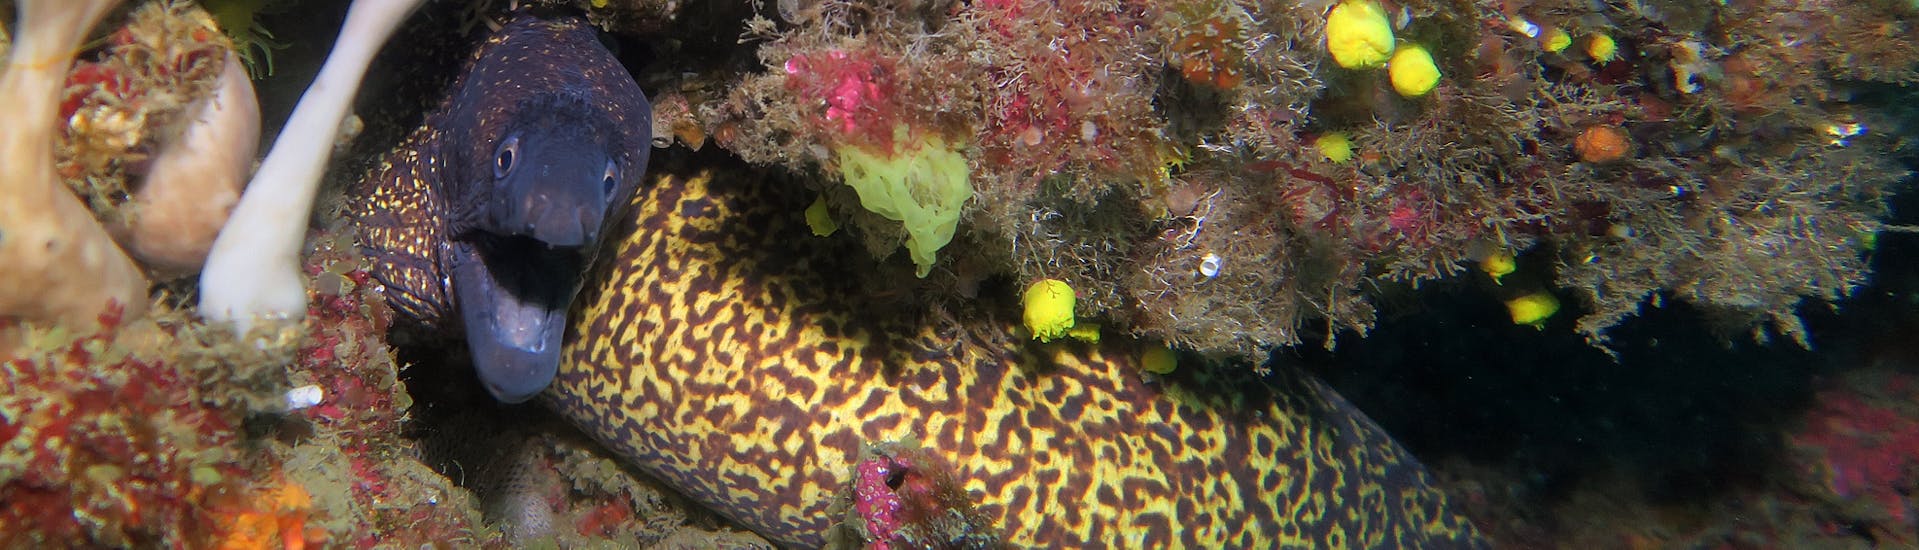 A moray during the PADI Open Waters Course in Taormina for Beginners with Nike Diving Centre Taormina.